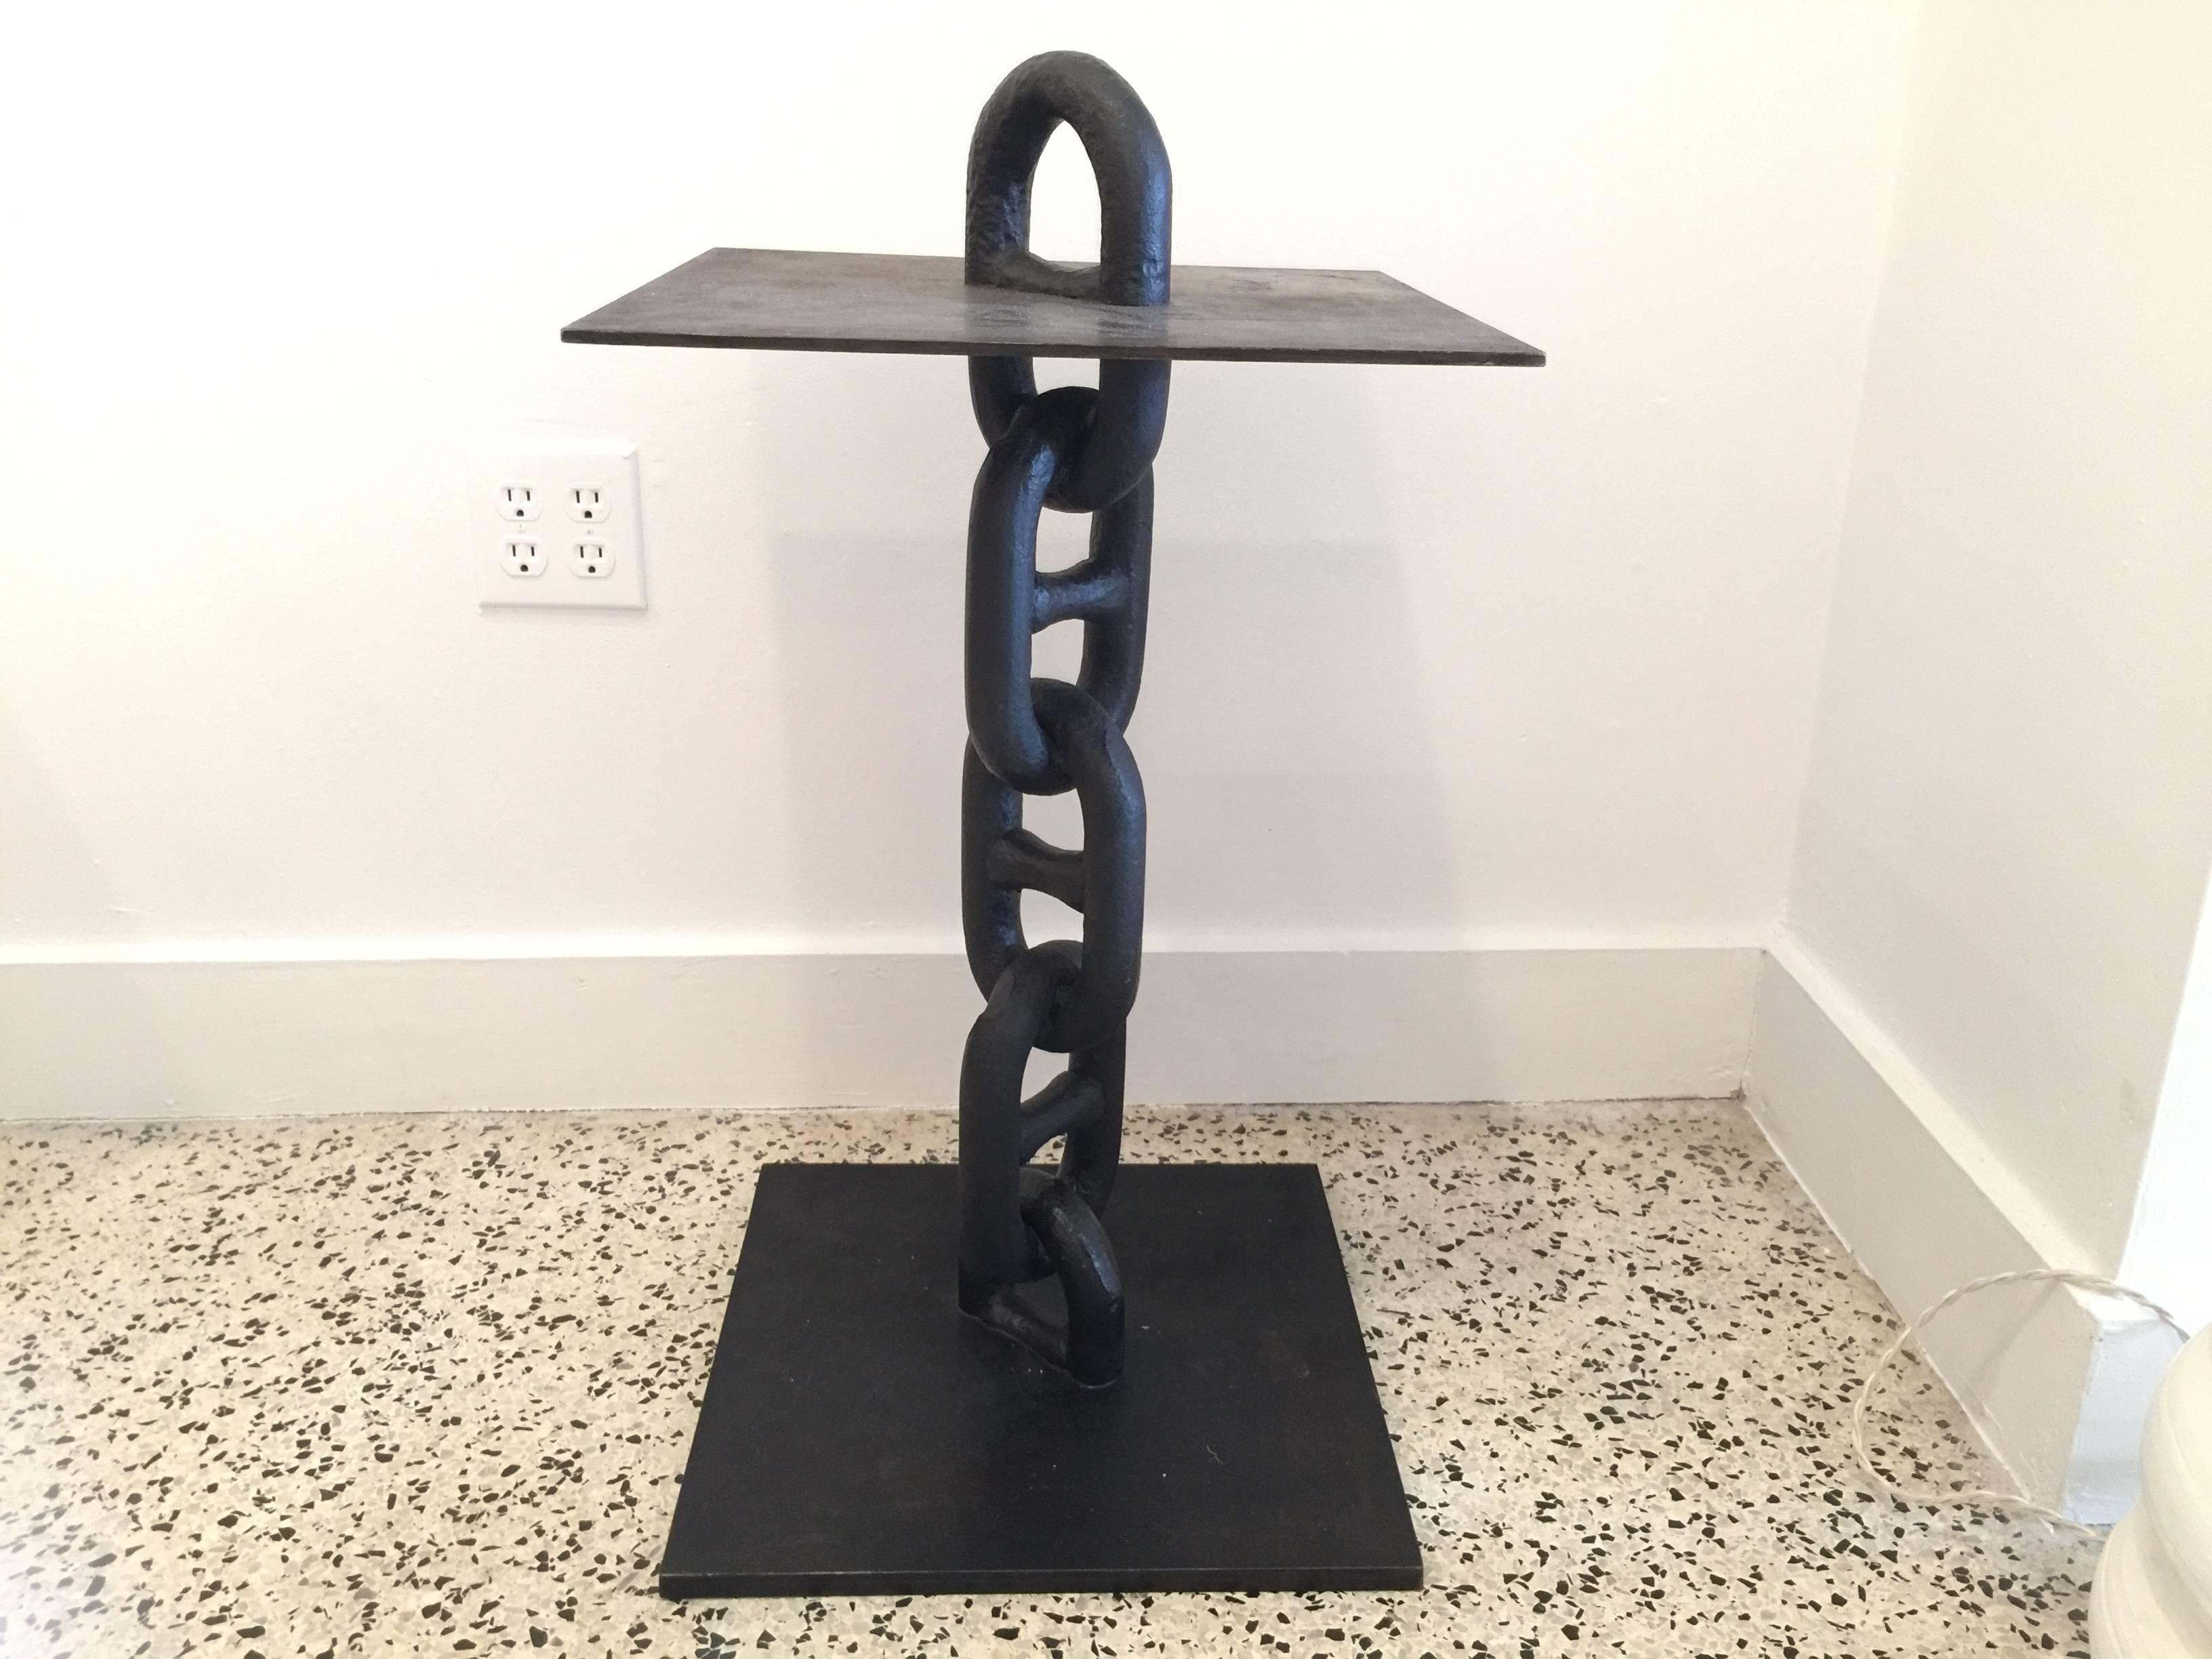 In the brutal style after Hermes' iconic chain design, this studio piece is by Gustavo Olivieri.

Only four tables made - priced and sold individually.

Note: total height to top of chain is 30.5 inches.